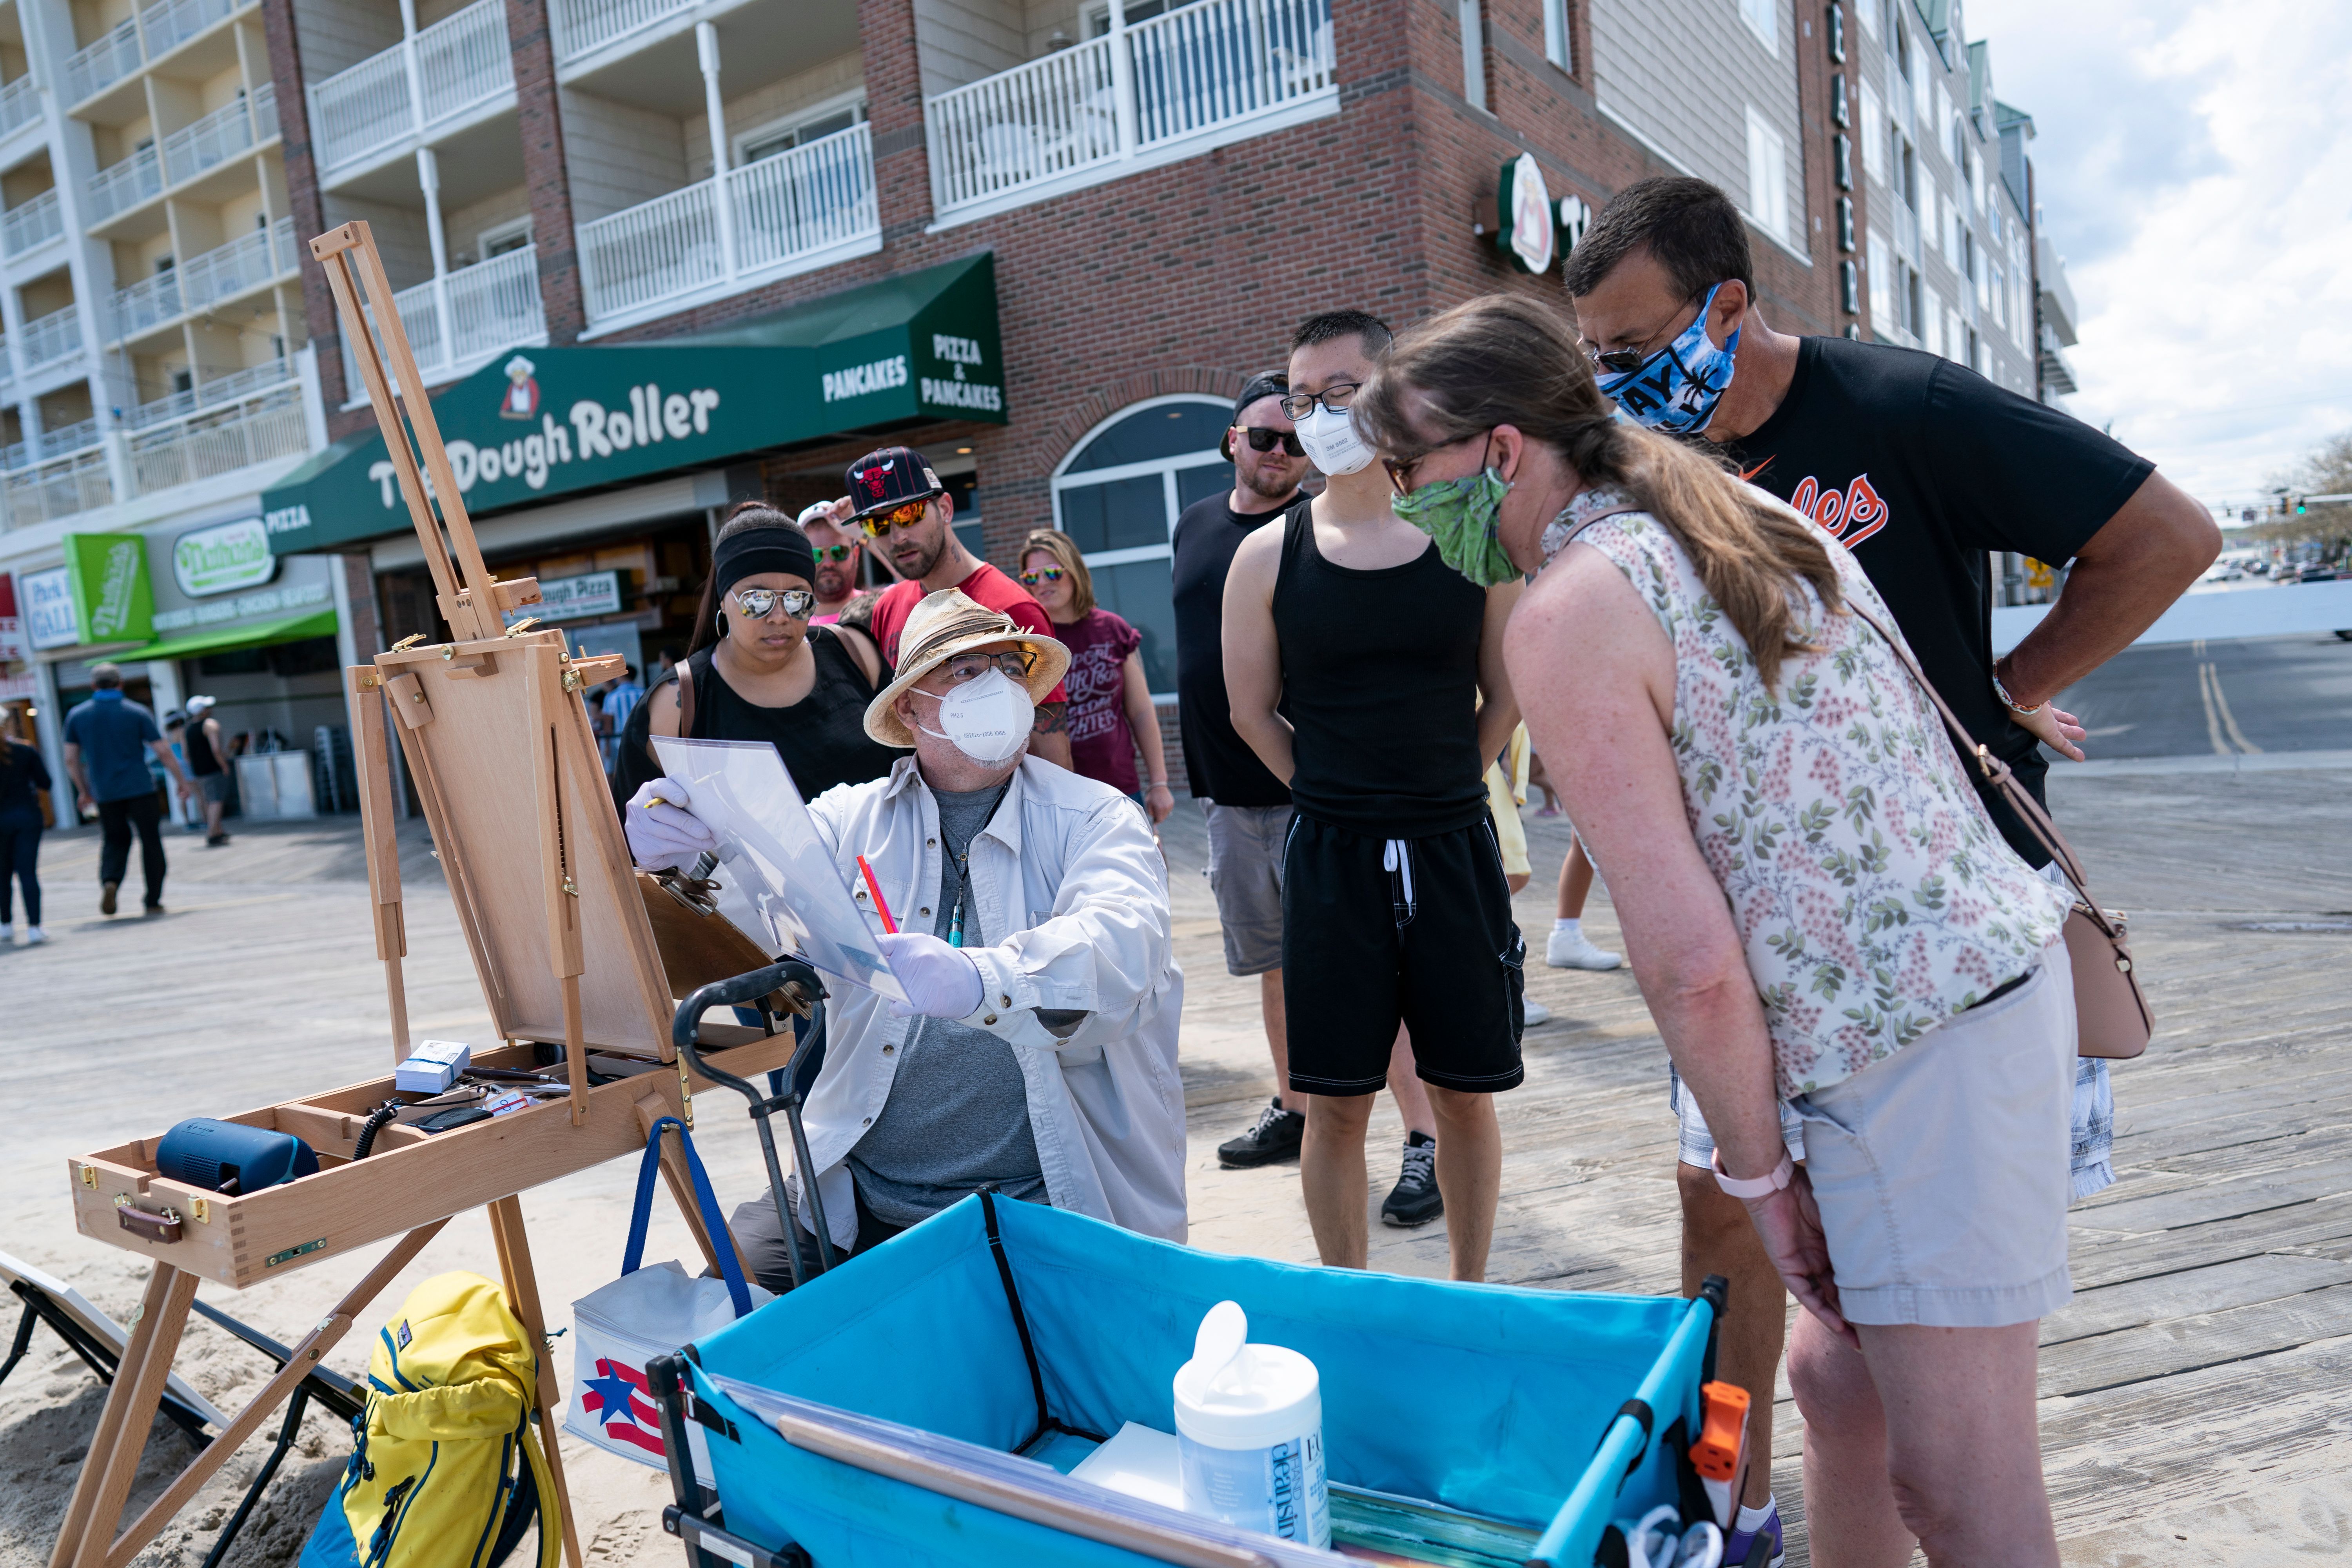 In this image, an artist paints for a small crowd. Most are wearing face masks